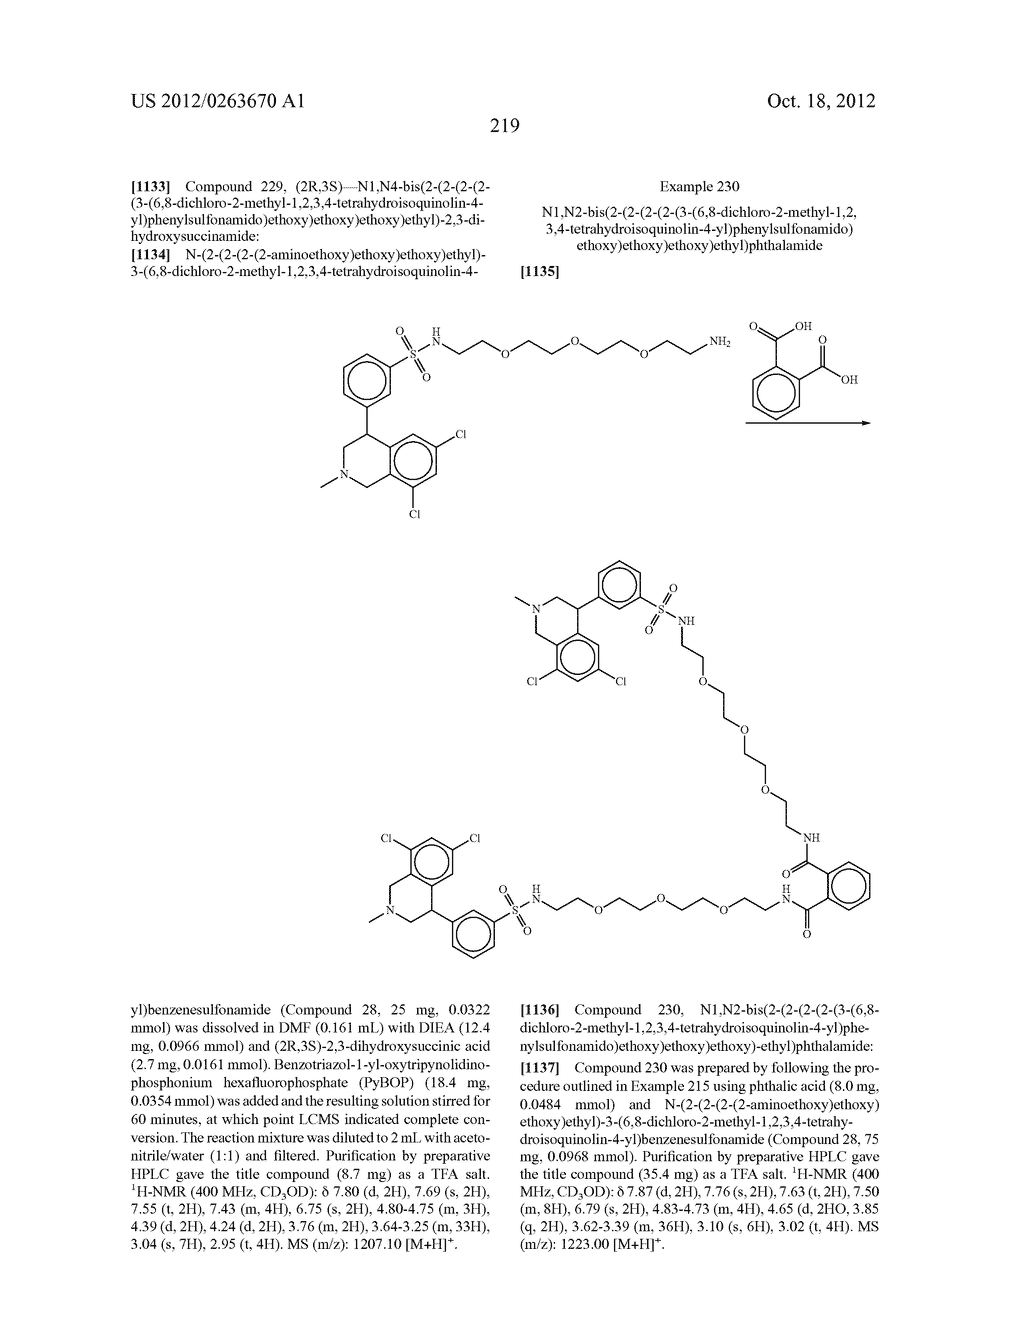 COMPOUNDS AND METHODS FOR INHIBITING NHE-MEDIATED ANTIPORT IN THE     TREATMENT OF DISORDERS ASSOCIATED WITH FLUID RETENTION OR SALT OVERLOAD     AND GASTROINTESTINAL TRACT DISORDERS - diagram, schematic, and image 227